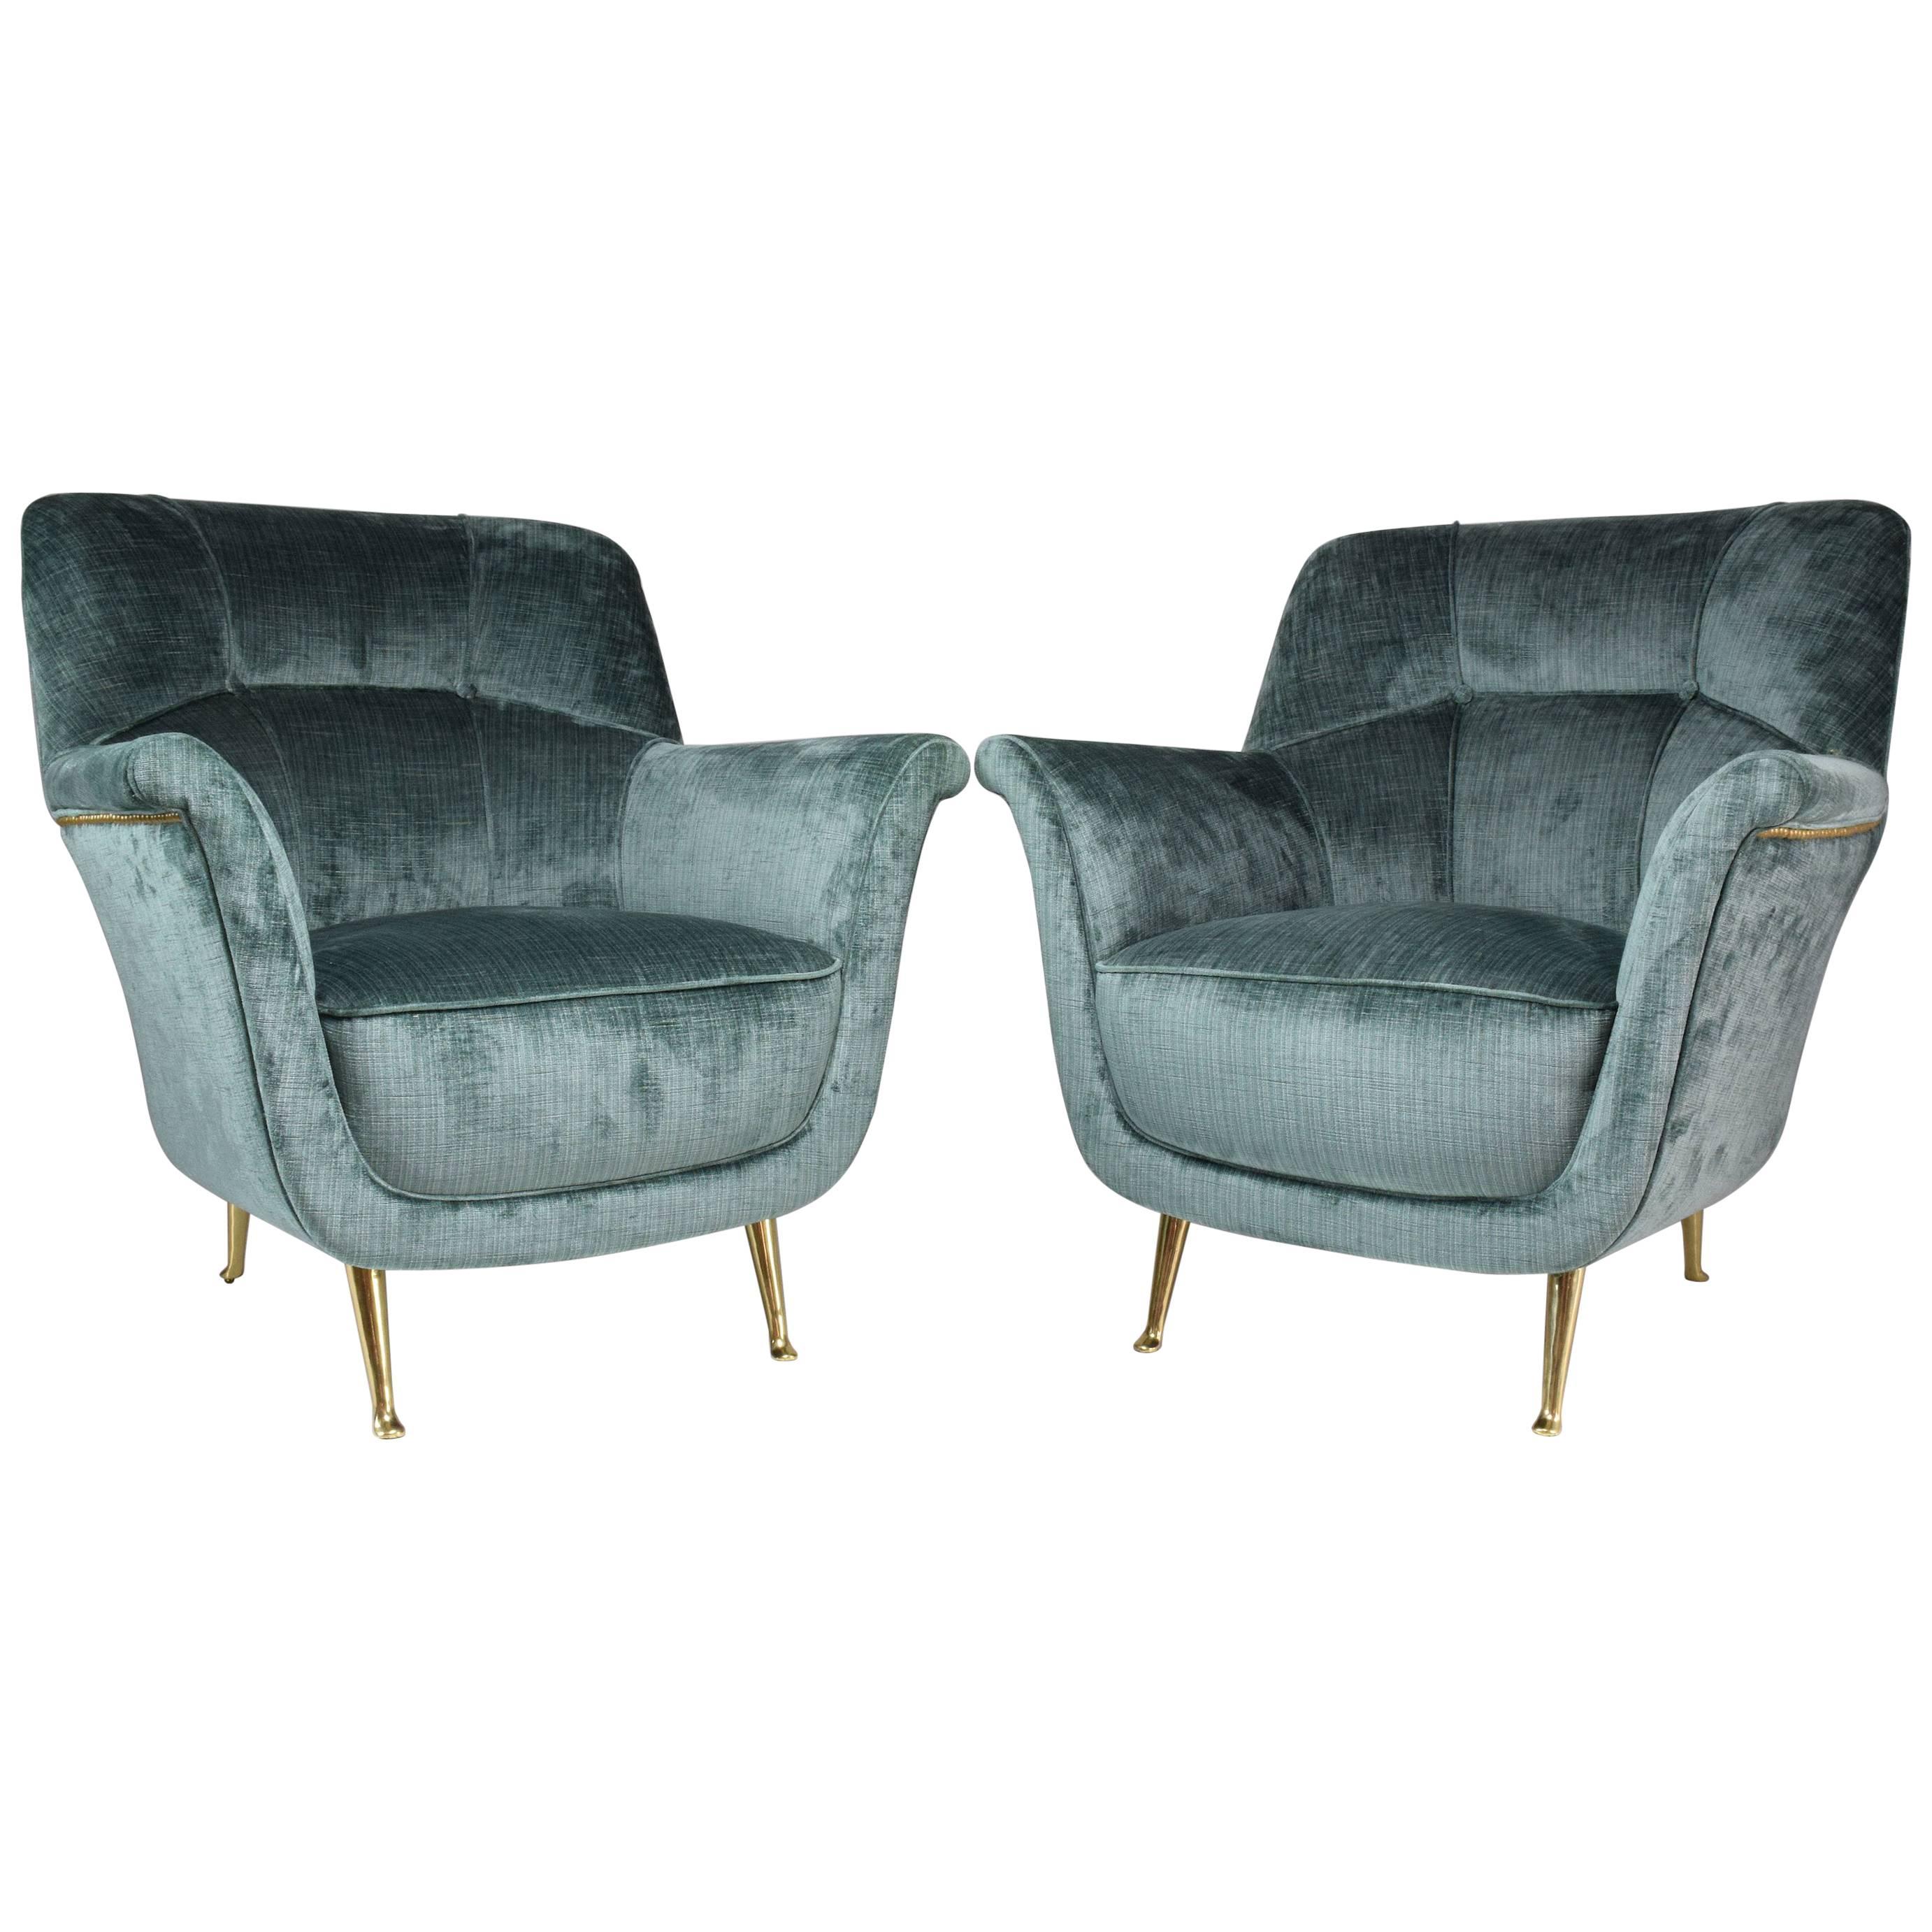 Set of two Italian 20th century vintage collectable armchairs manufactured by ISA Bergamo.
These midcentury design lounge chairs are highlighted by the winged arms, quilted backrest with gold nailhead trim and the iconic slender gold brass